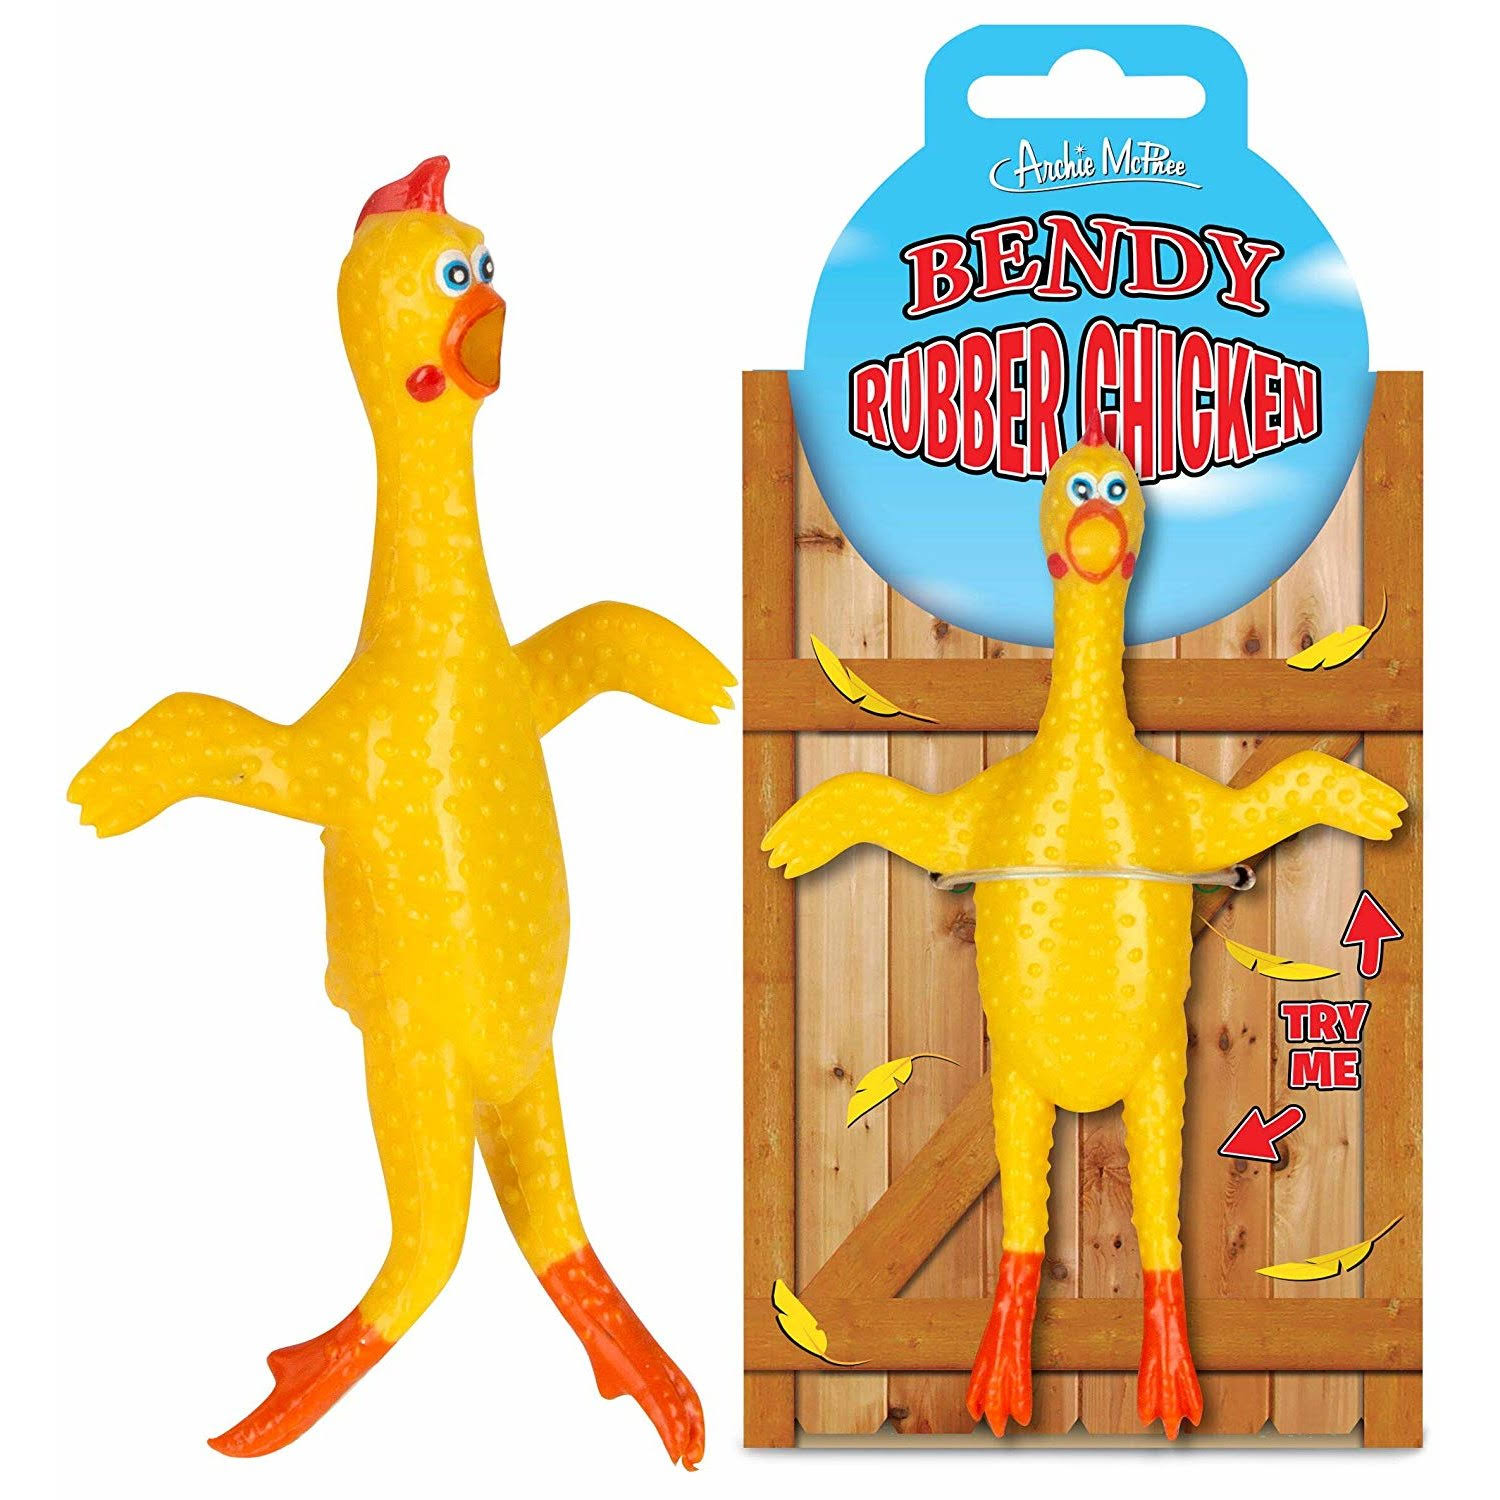 Character Goods - Archie McPhee - Bendy Rubber Chicken New 12866